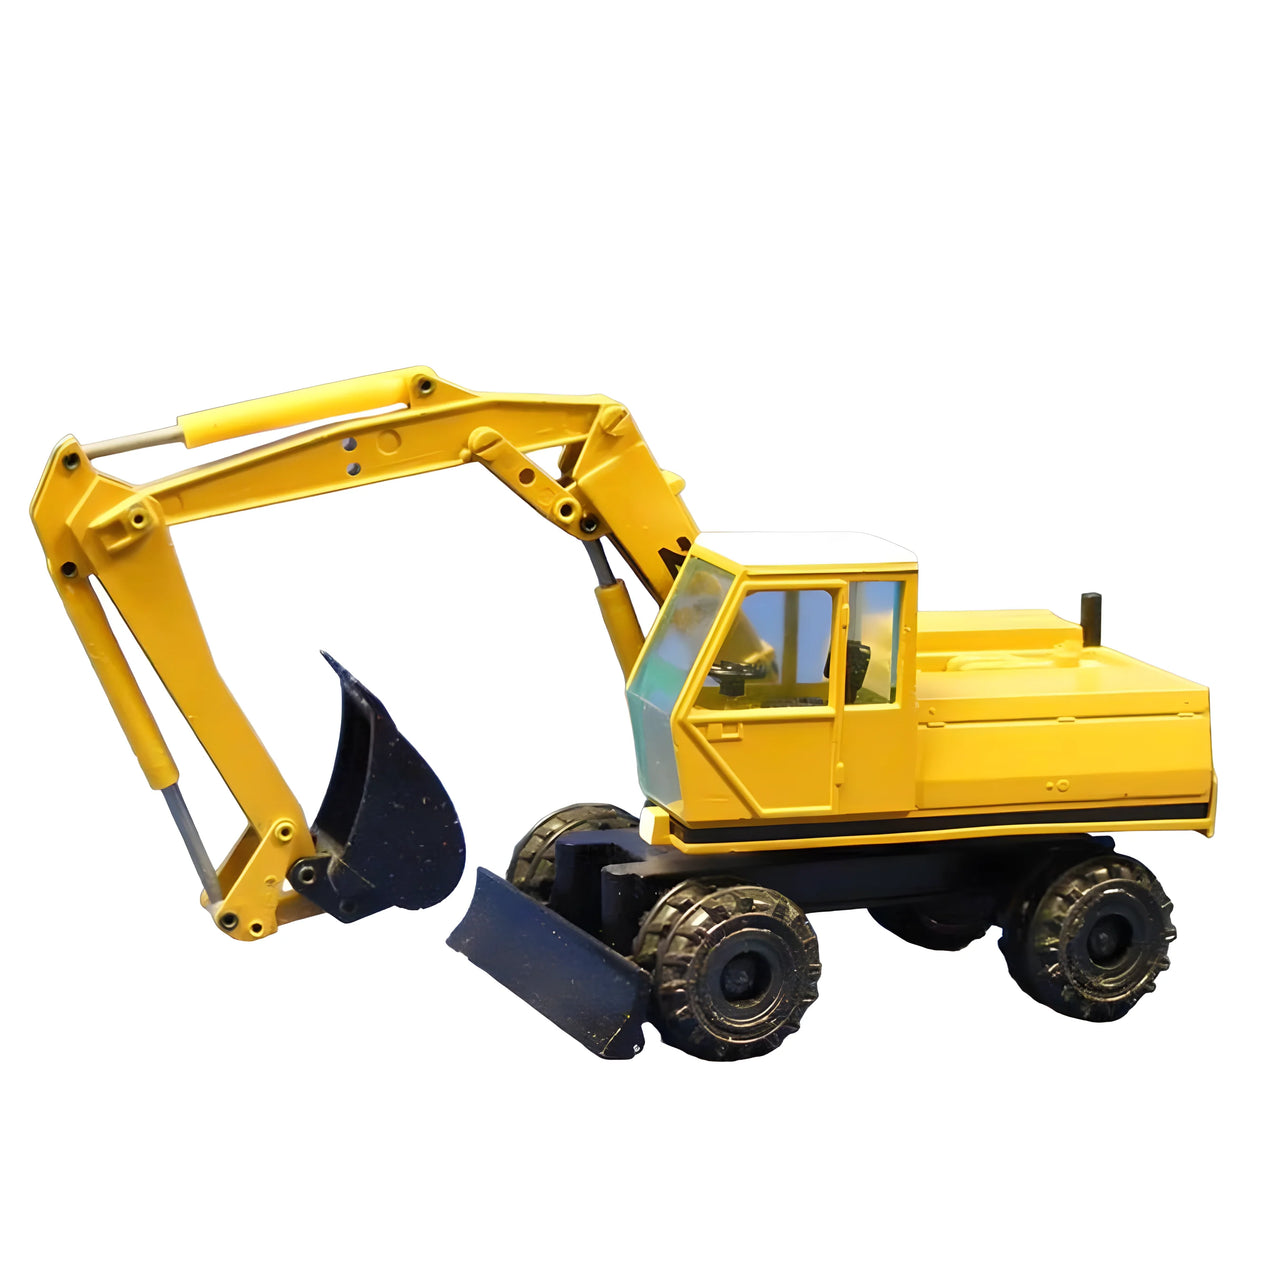 2812.2 Zeppelin 214 Wheeled Excavator Scale 1:50 (Discontinued Model)